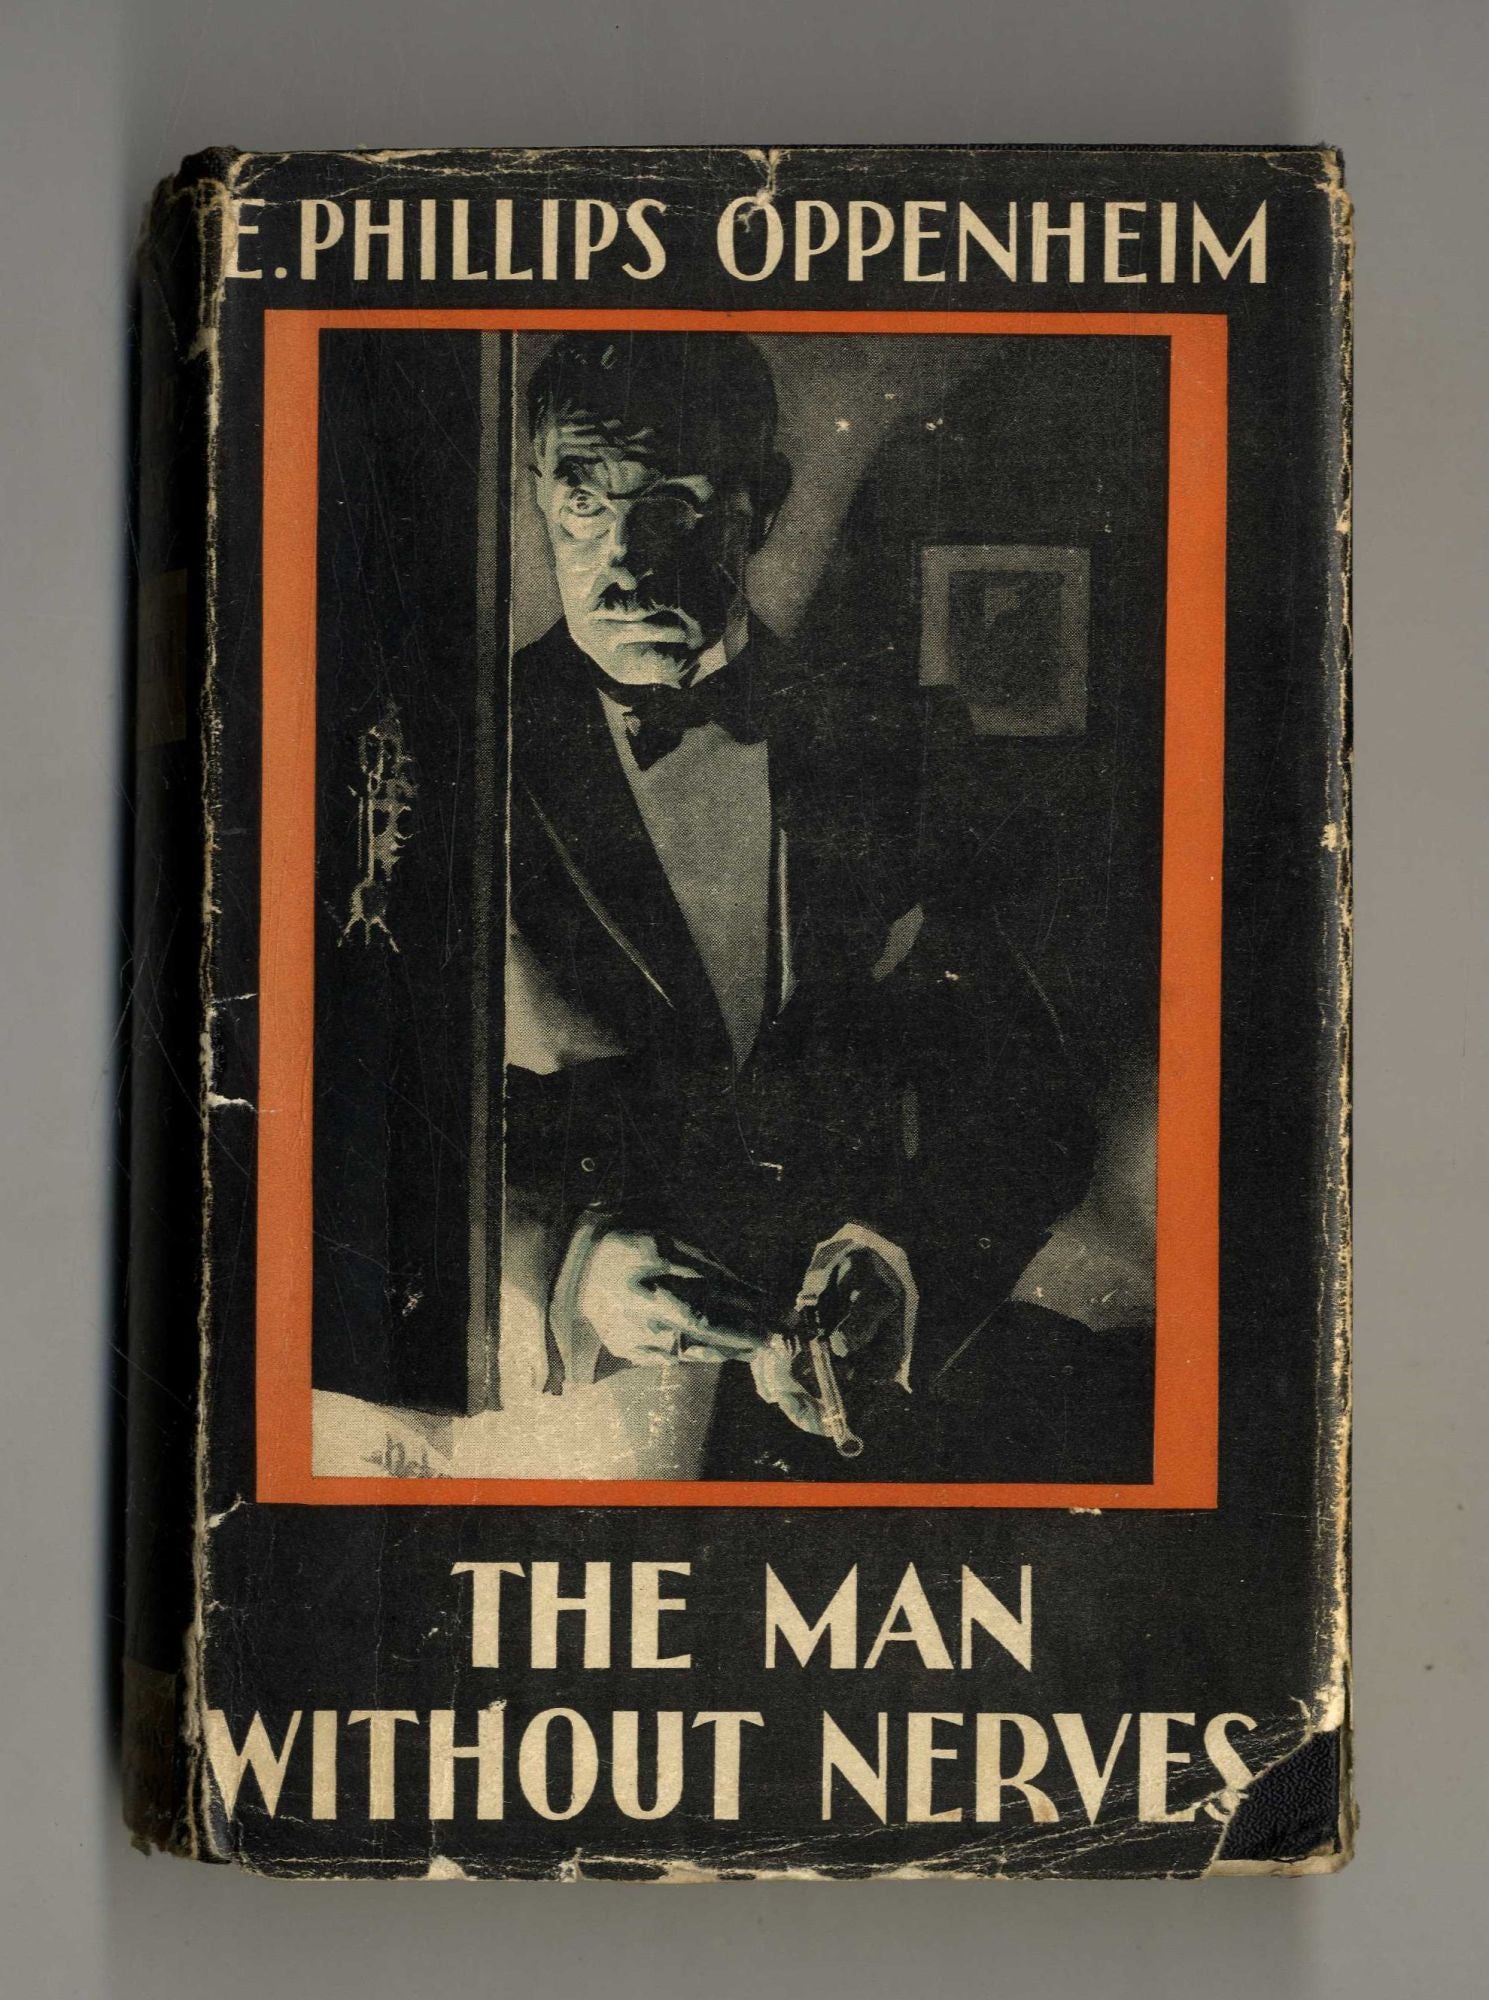 Book #160204 The Man Without Nerves. E. Phillips Oppenheim.